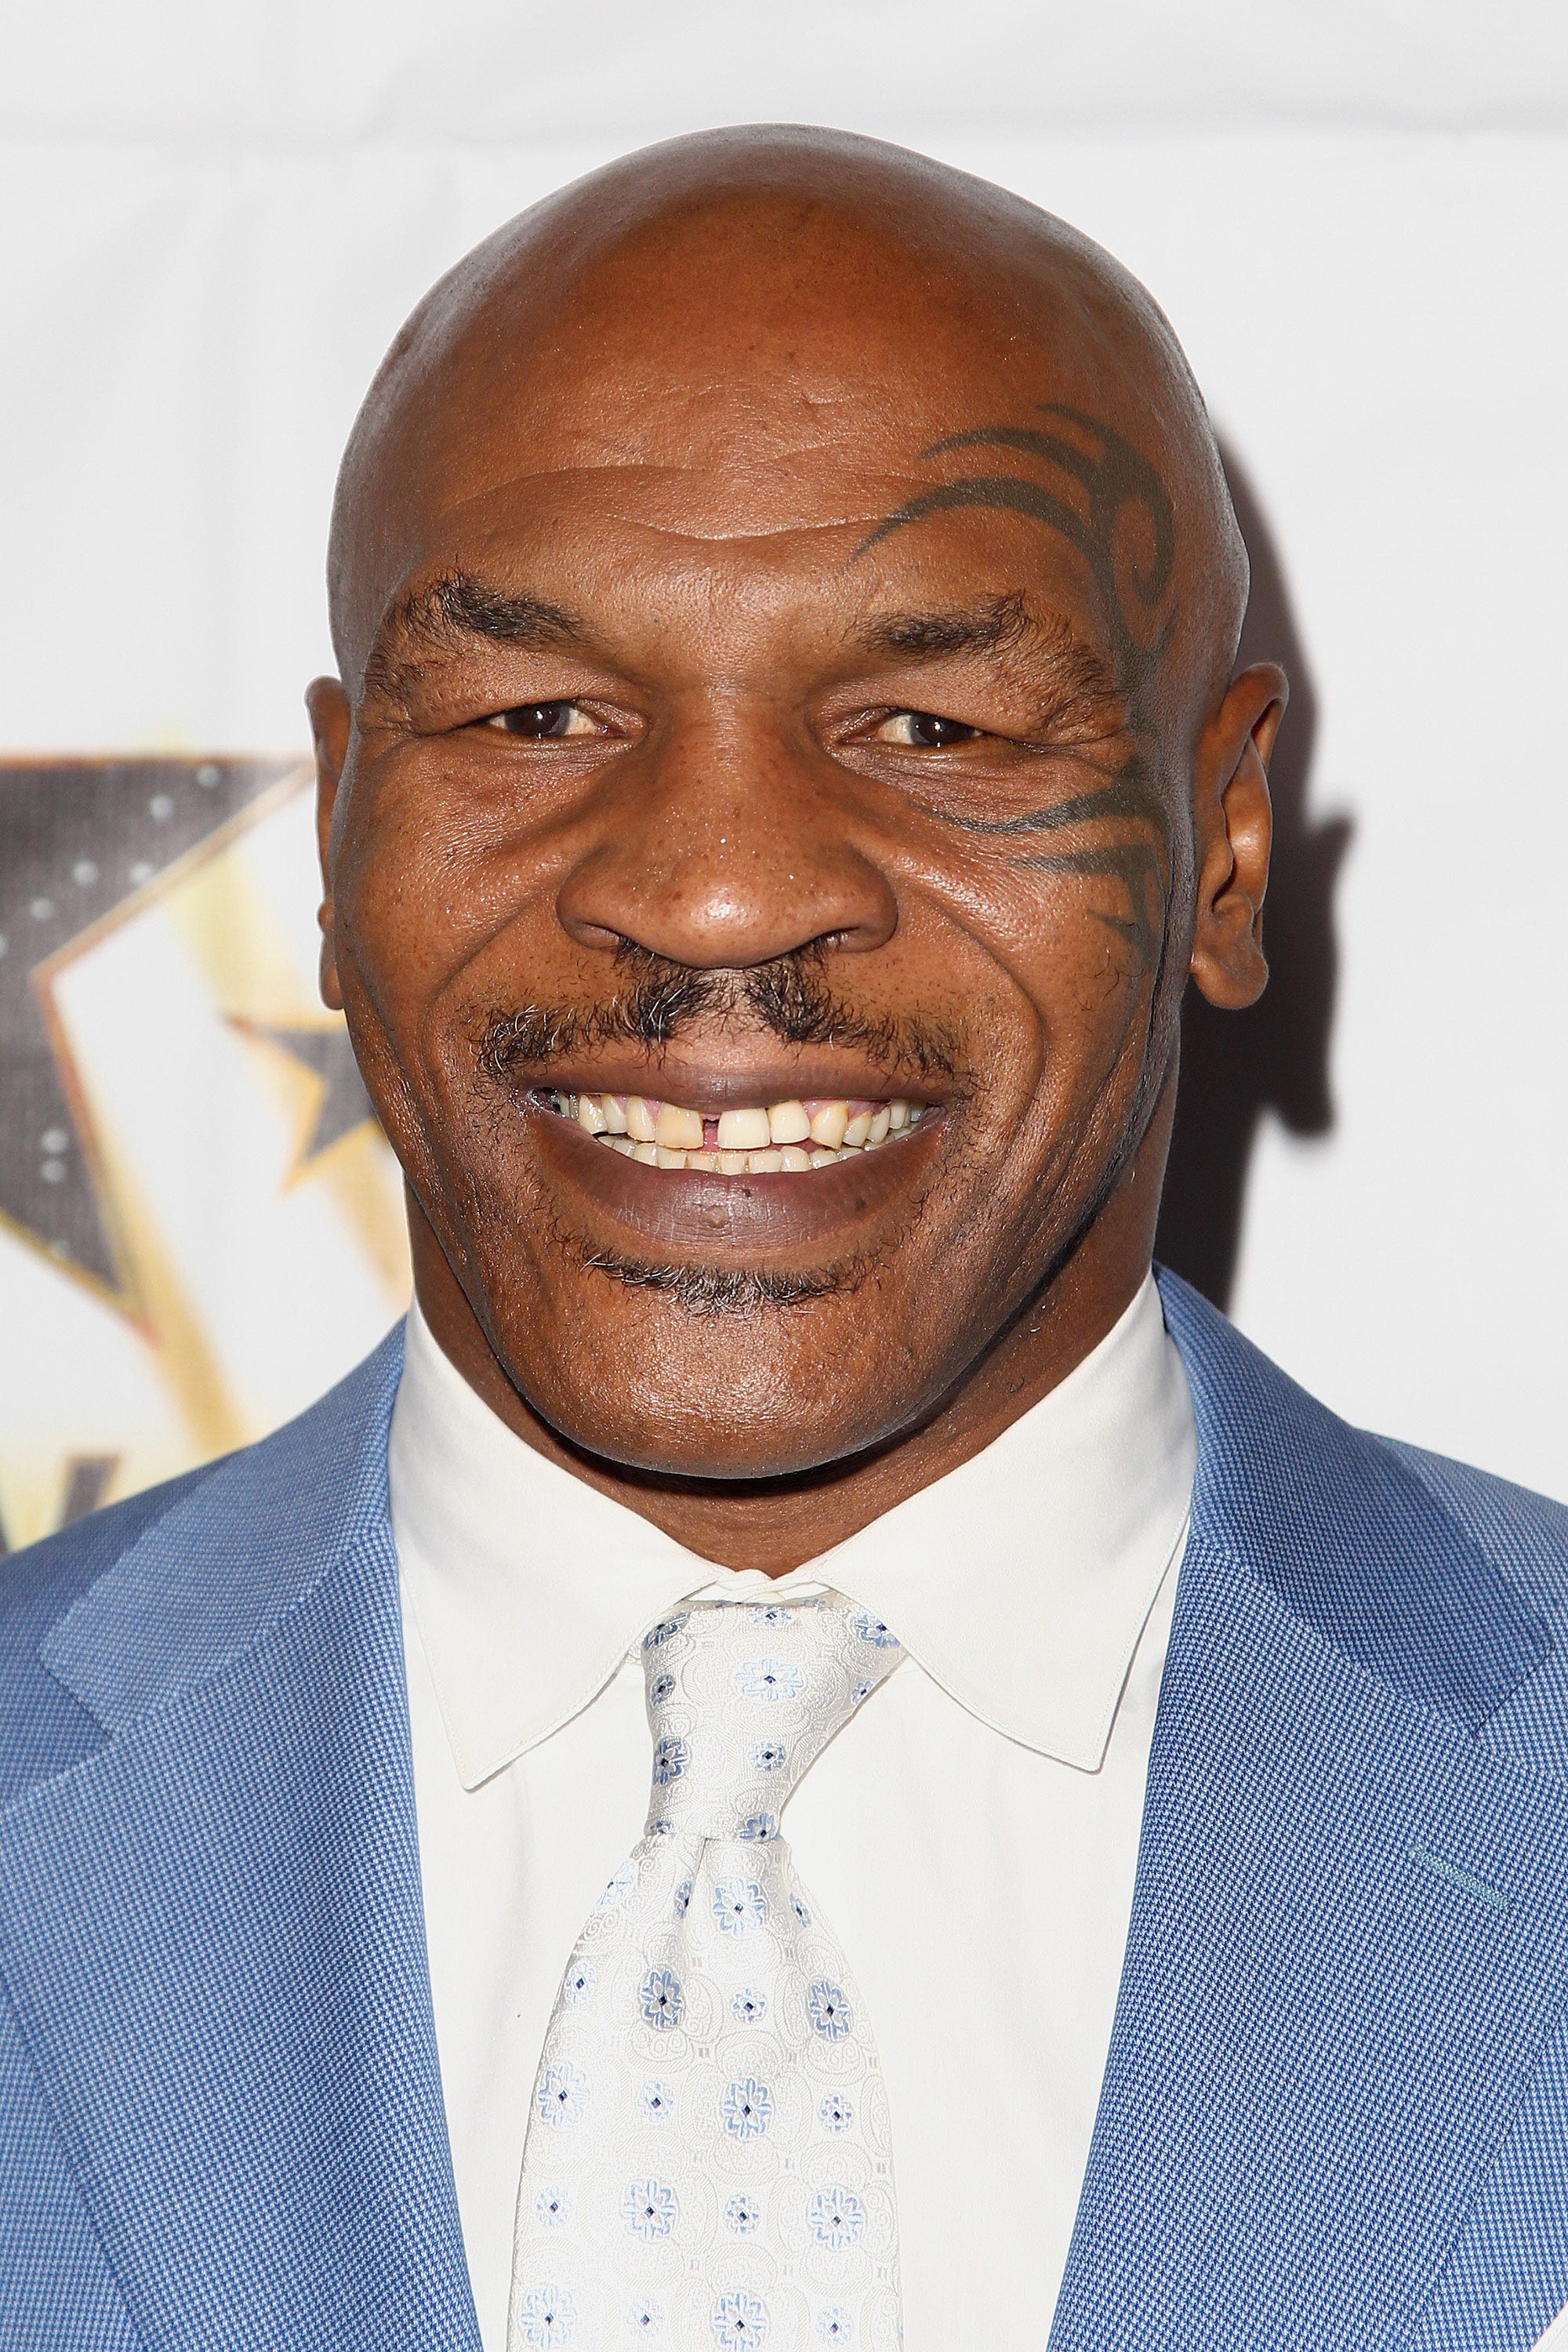 Mike Tyson disses Soulja Boy in new music video, claims he's training Chris Brown